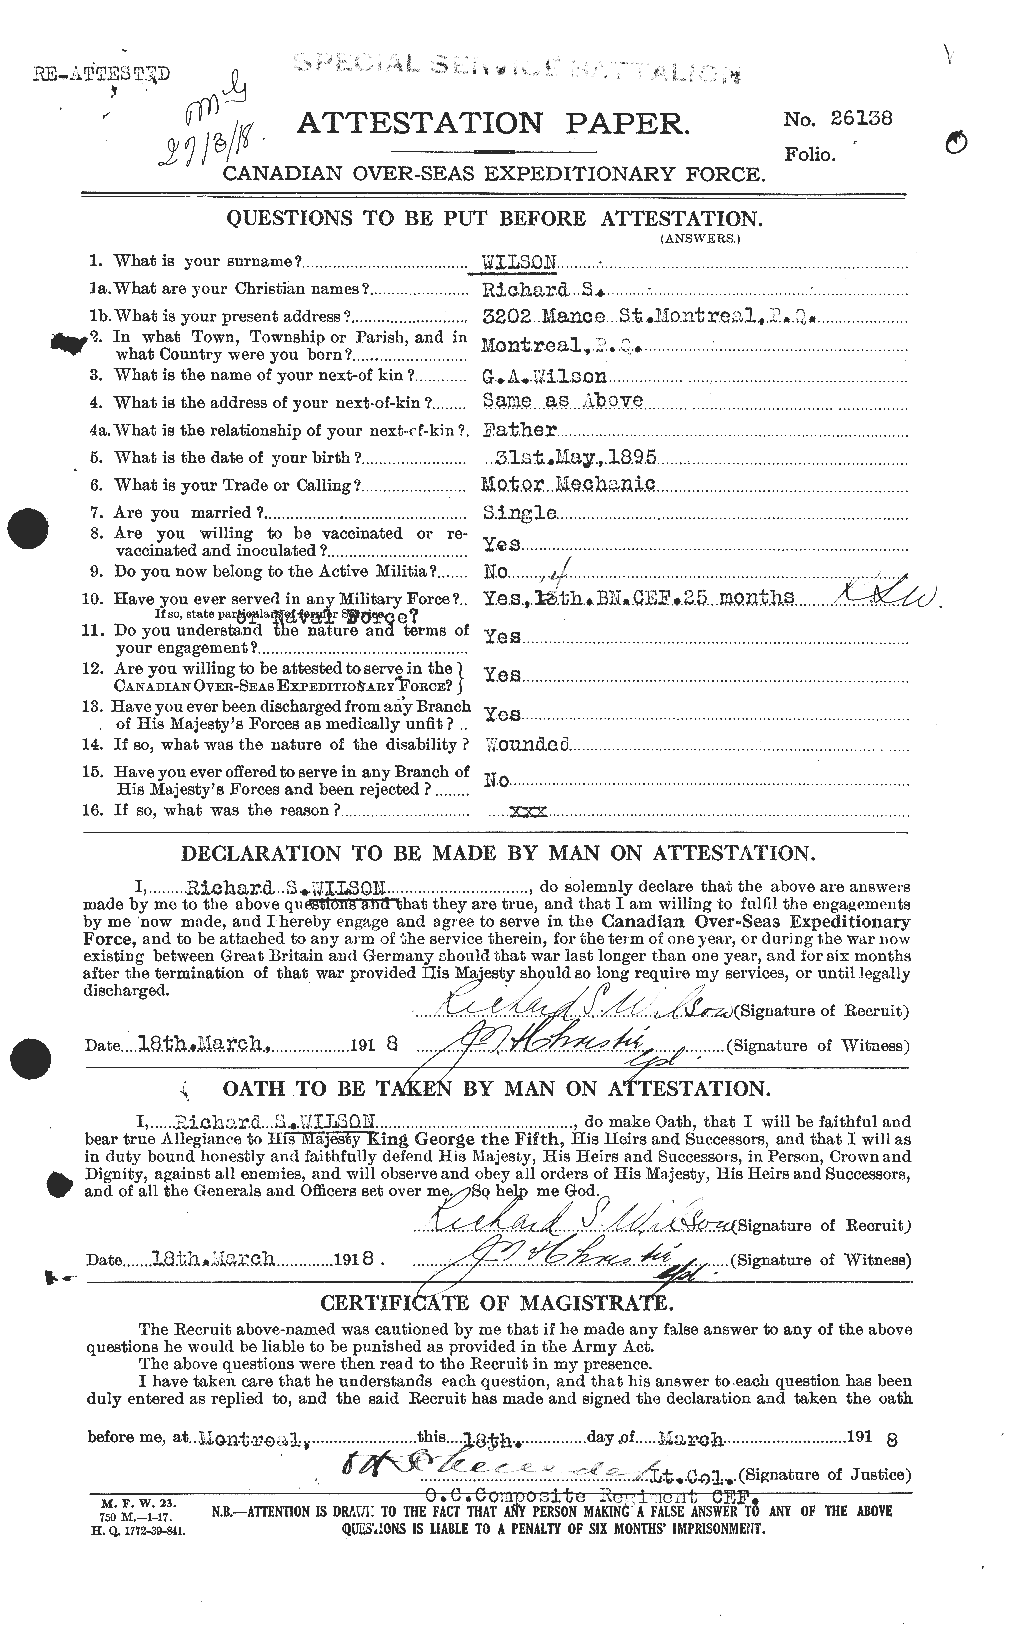 Personnel Records of the First World War - CEF 678859a